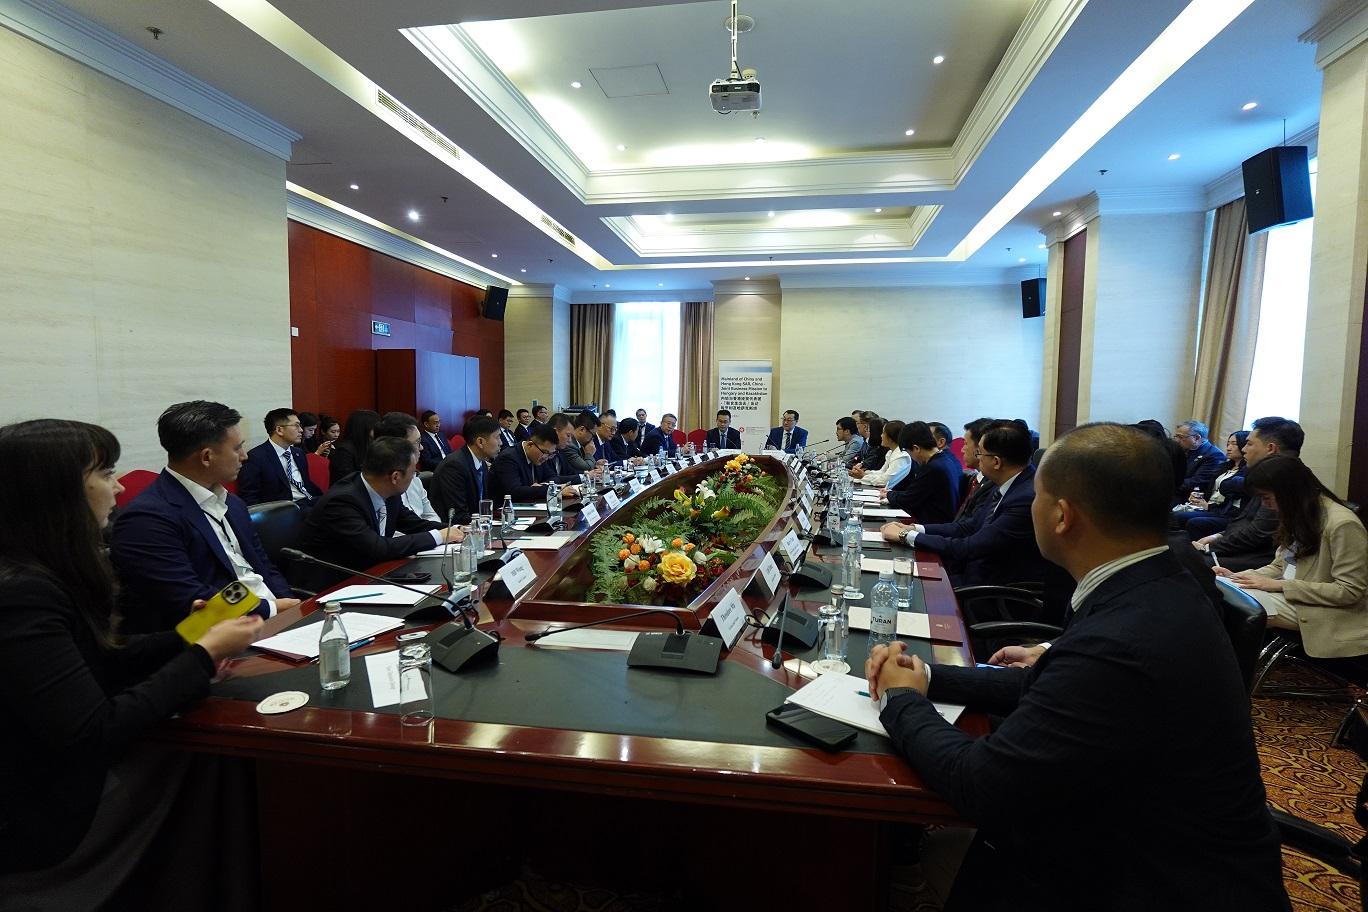 The Mainland-Hong Kong joint business mission visited Hungary and Kazakhstan from May 16 to 22. Photo shows the mission meeting with officials of the Ministry of Trade and Integration of the Republic of Kazakhstan in Astana on May 20.